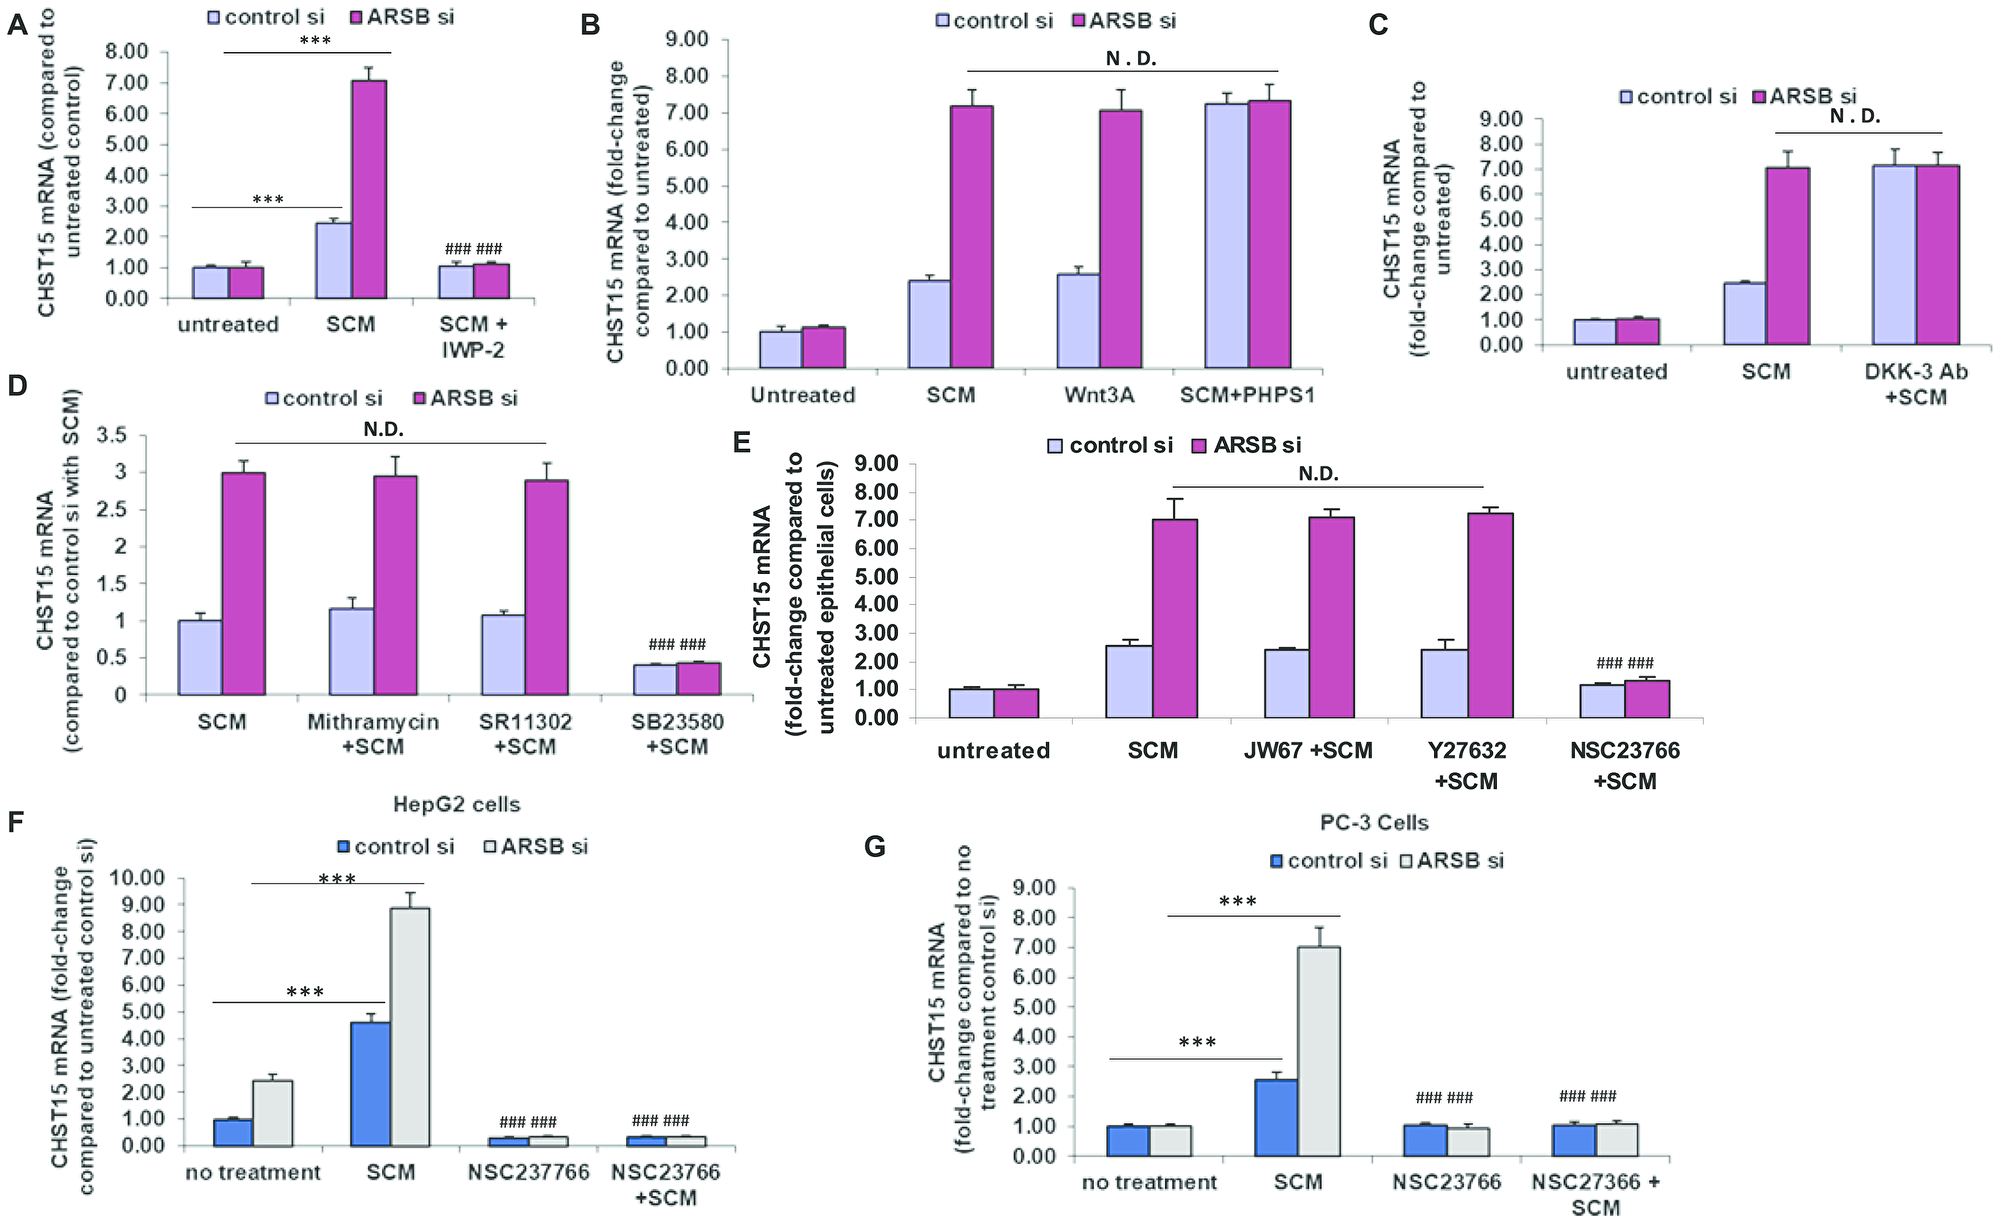 Modification of CHST15 expression in prostate epithelial cells by effects on Wnt signaling.